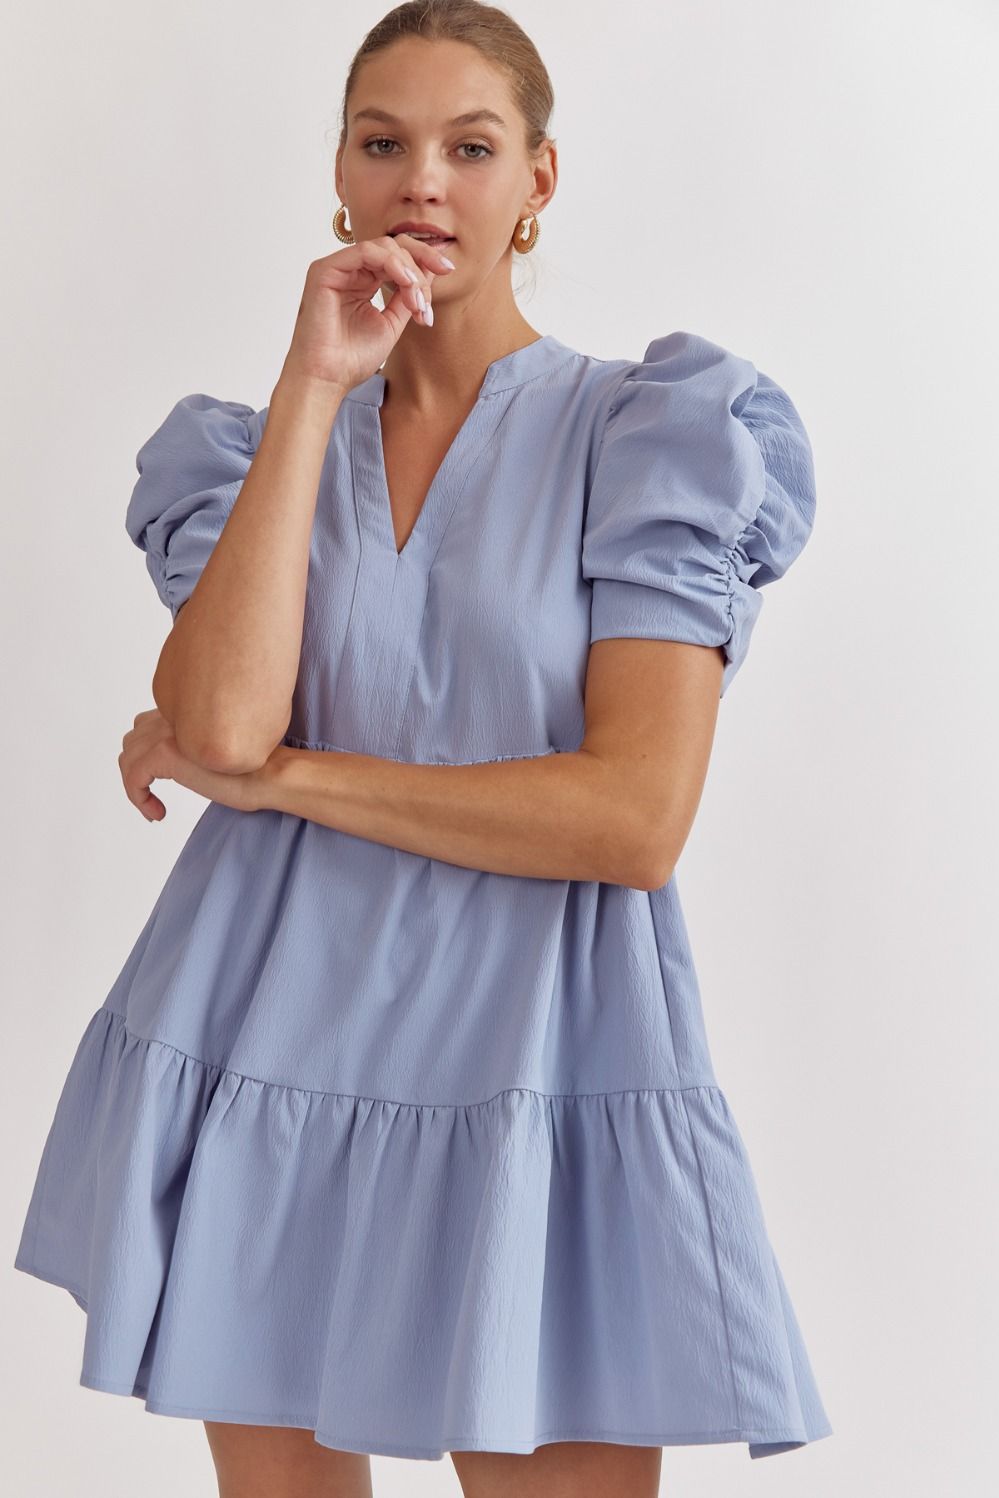 Juliette Solid Mini Dress with Short Puff Sleeves - Light Blue